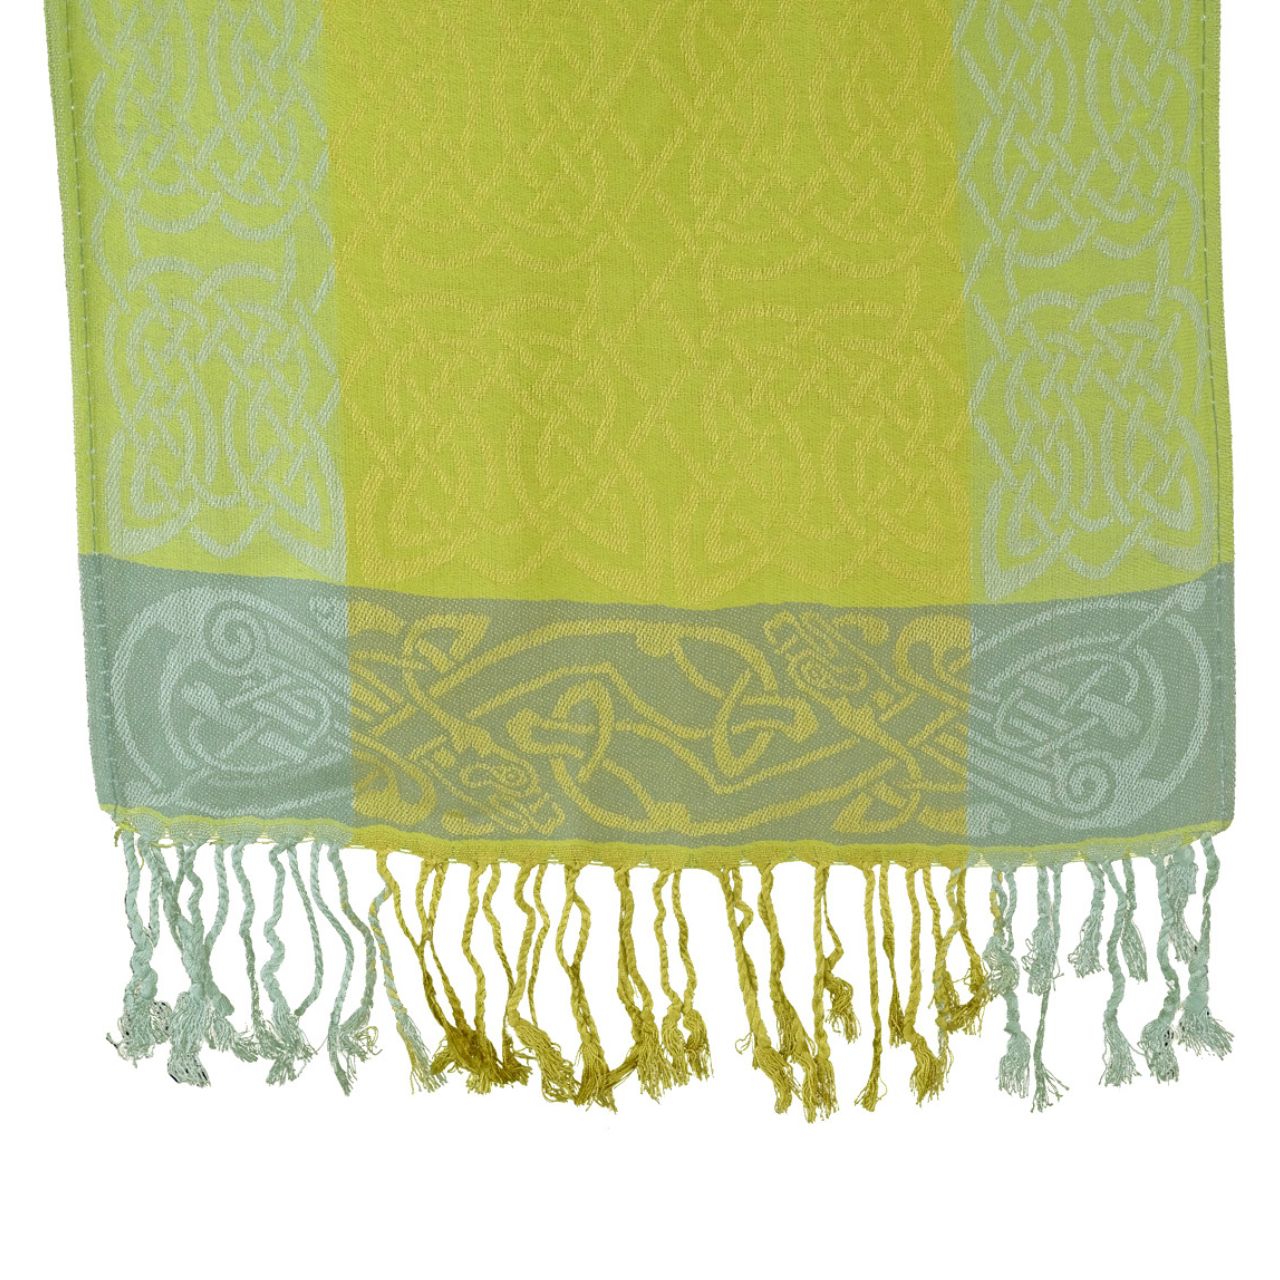 Keeragh Scarf Irish Scarf by Mulligans  “A splash of Celtic splendour”  Each of these Mulligans Ireland “Island Range” of scarves has been inspired by and named after an Irish Island. Each one comes with a story about the island, its history and inhabitants.